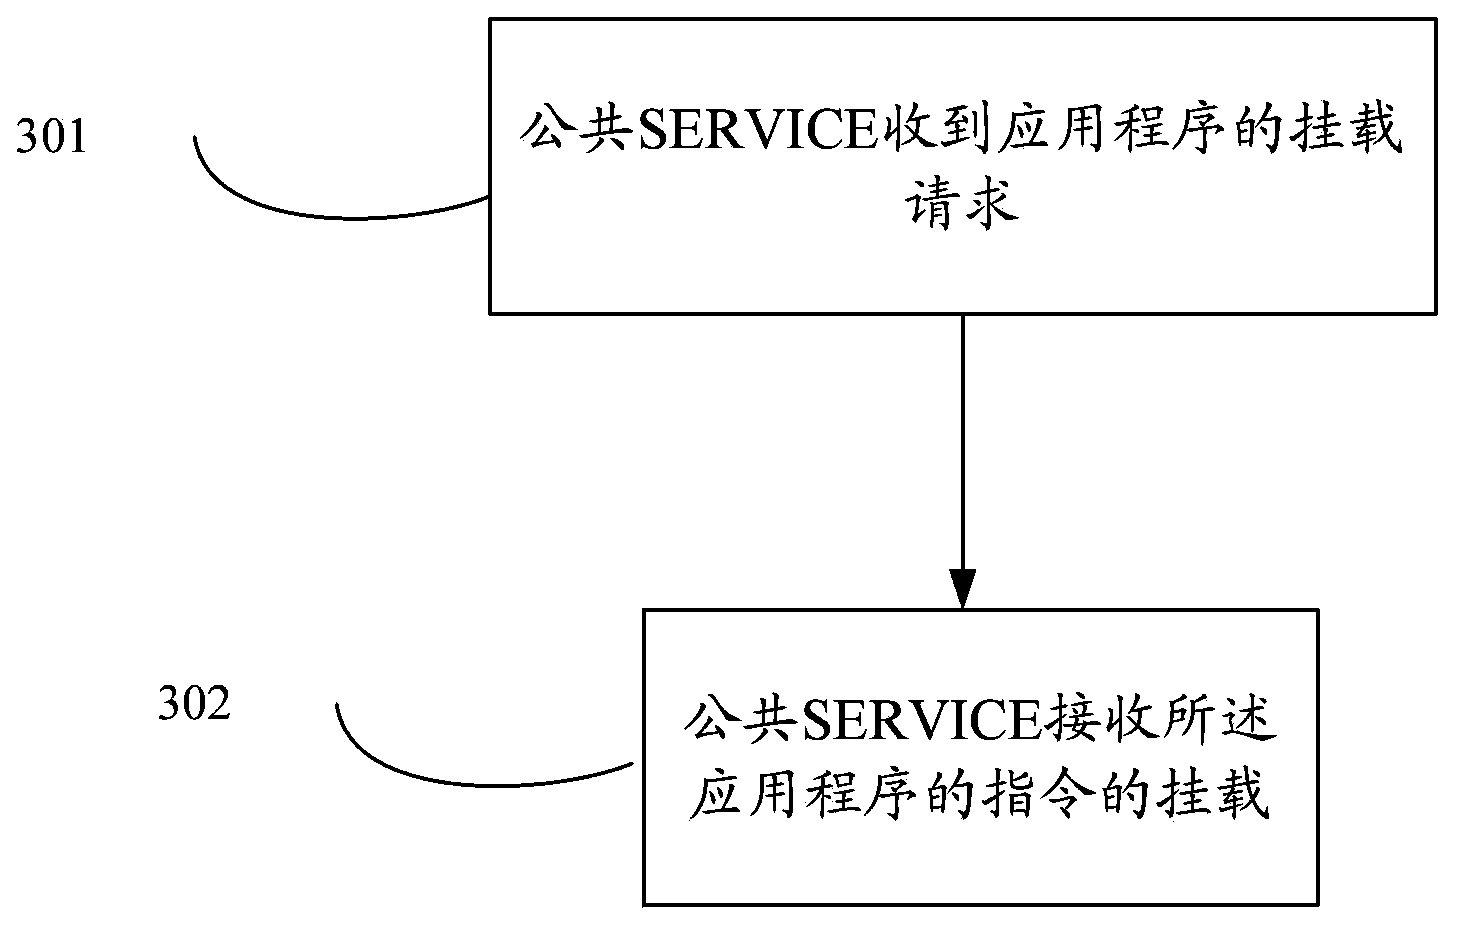 Method and apparatus for realizing local service sharing of mobile terminal operating system